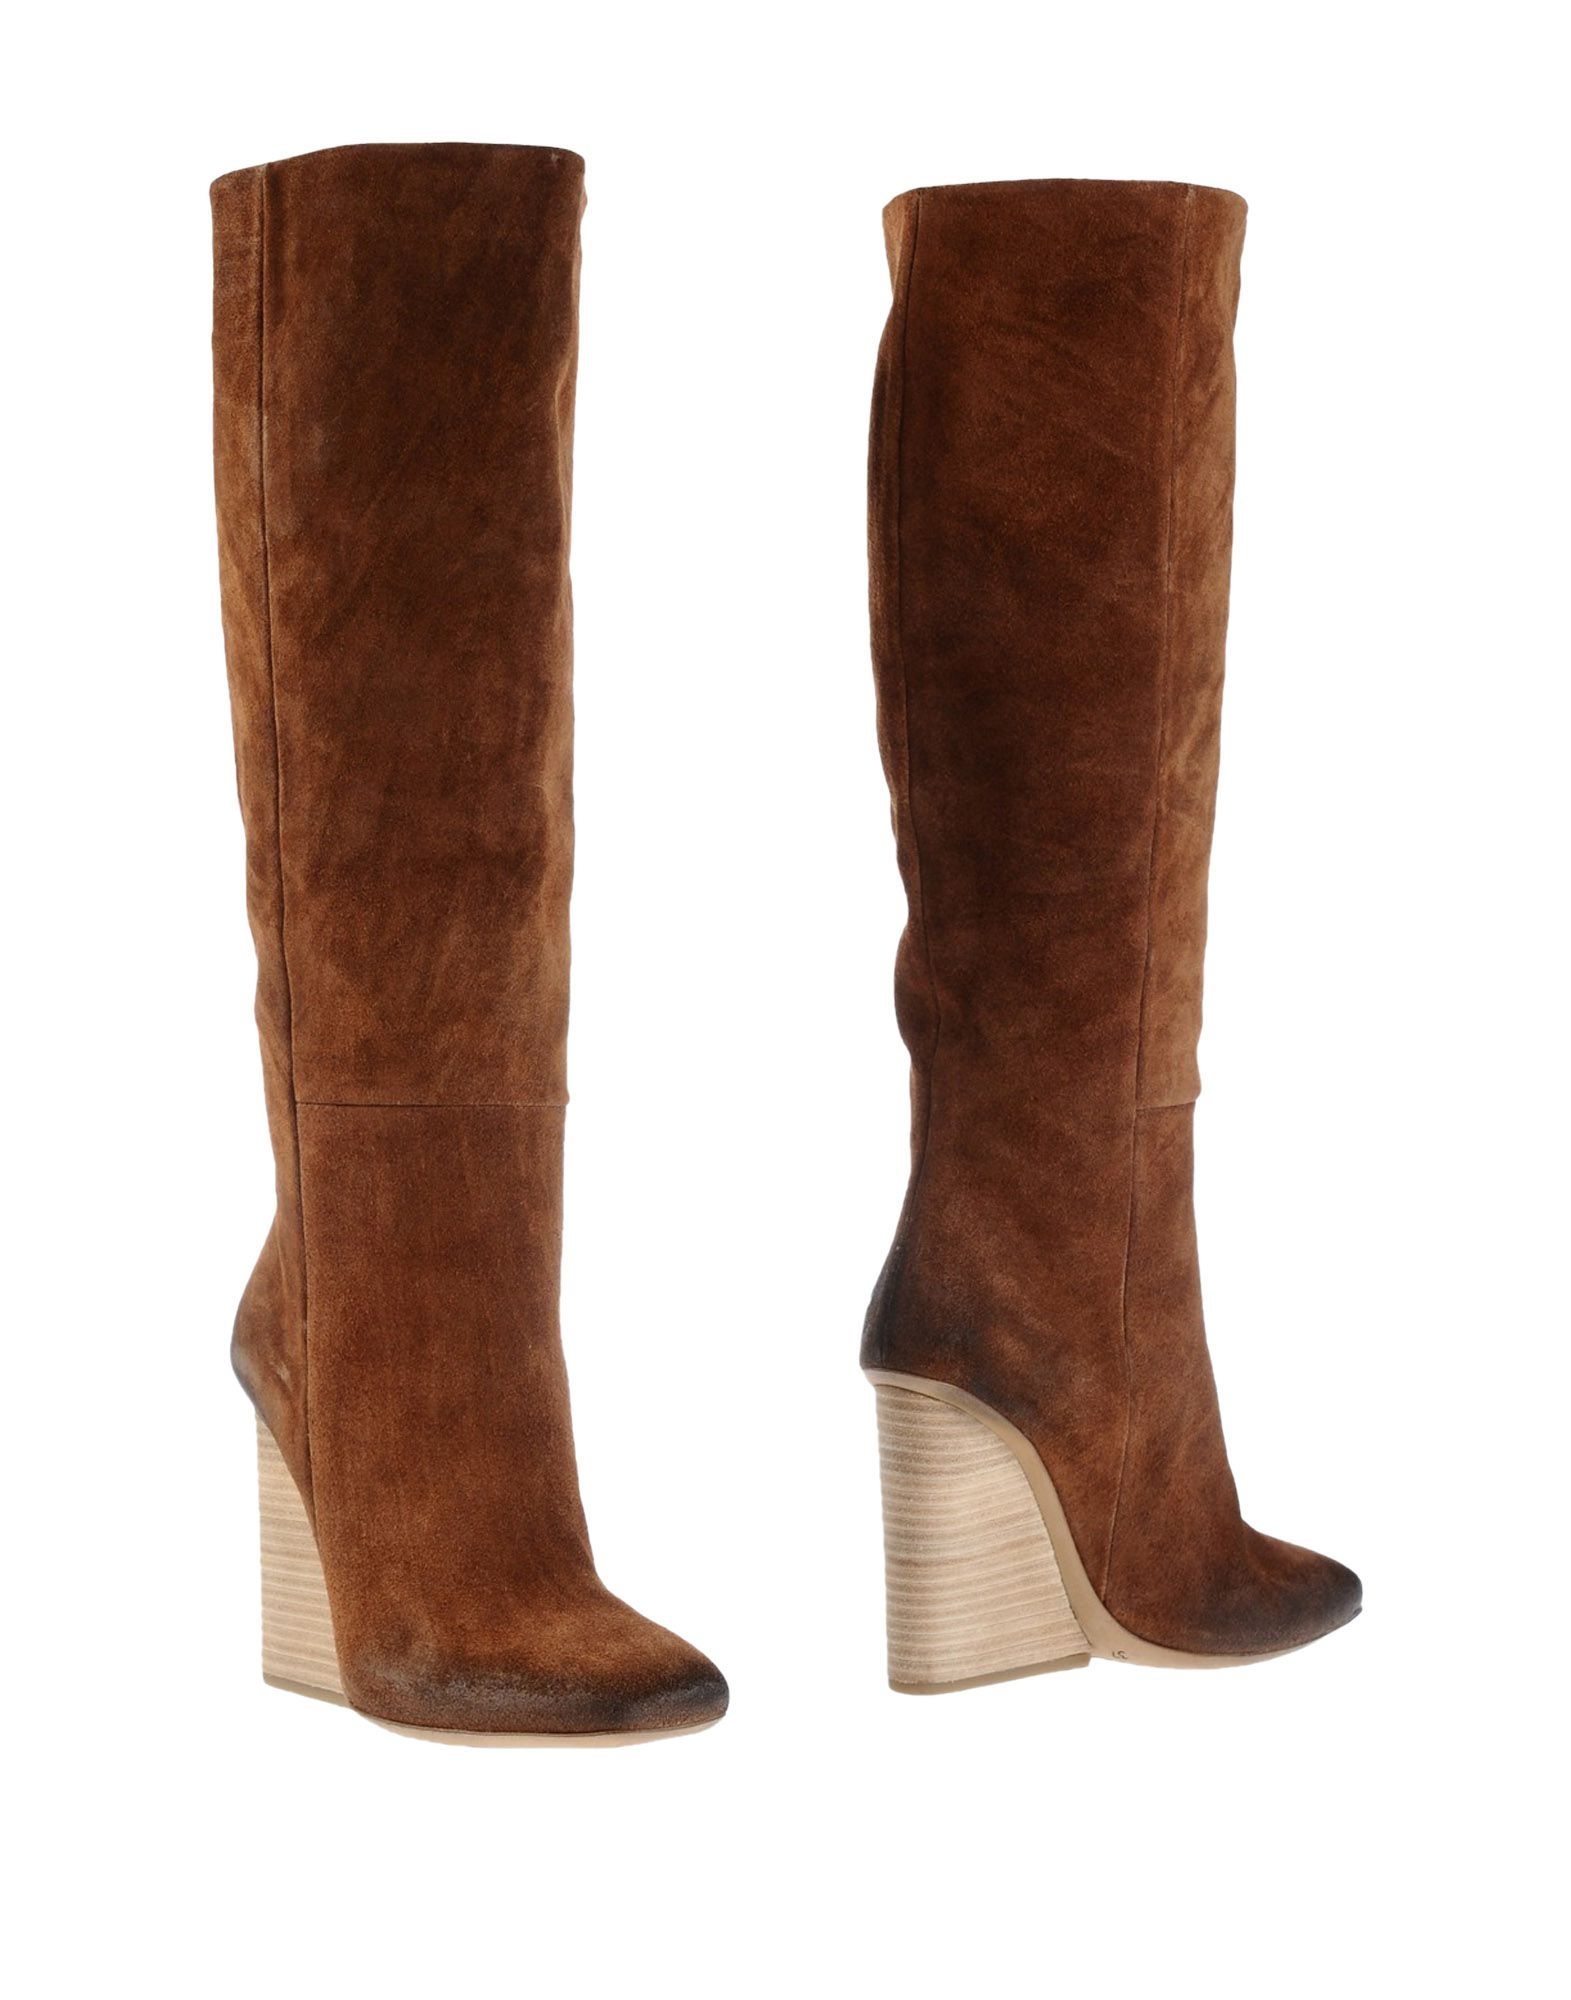 Lyst - Vic matié Boots in Brown